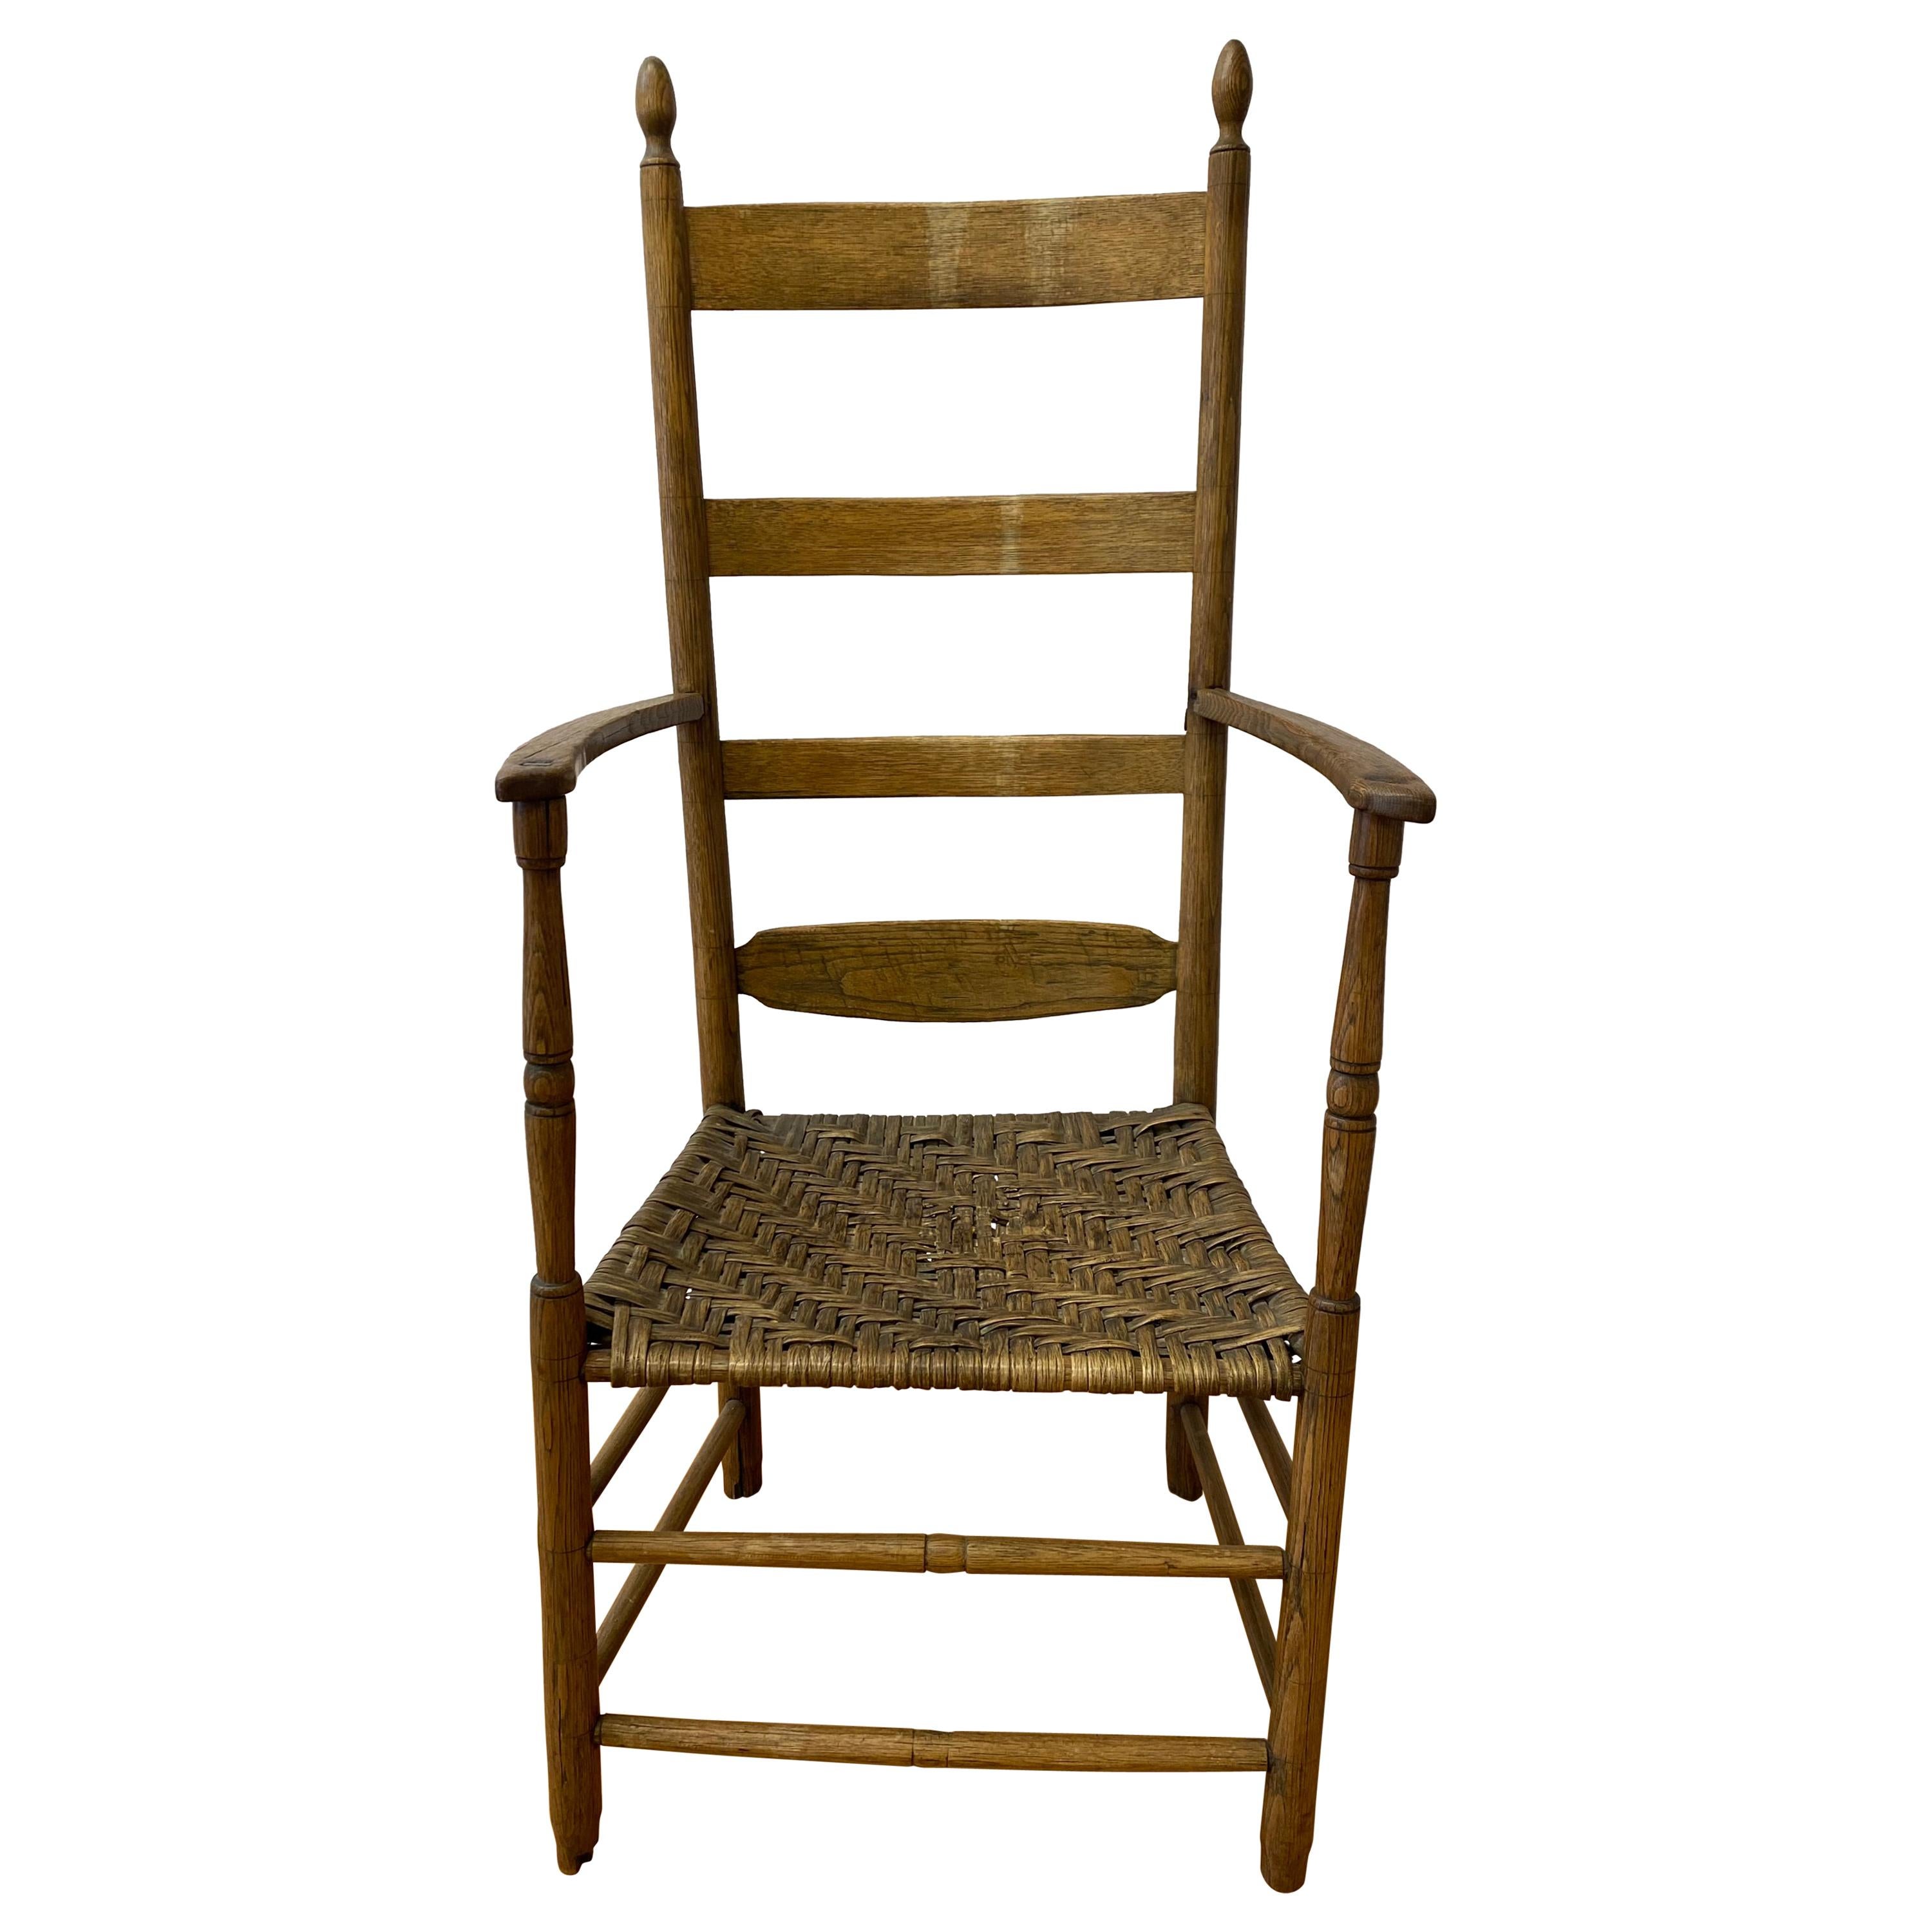 18th to 19th Century Ladder Back Chair with Reed Seat